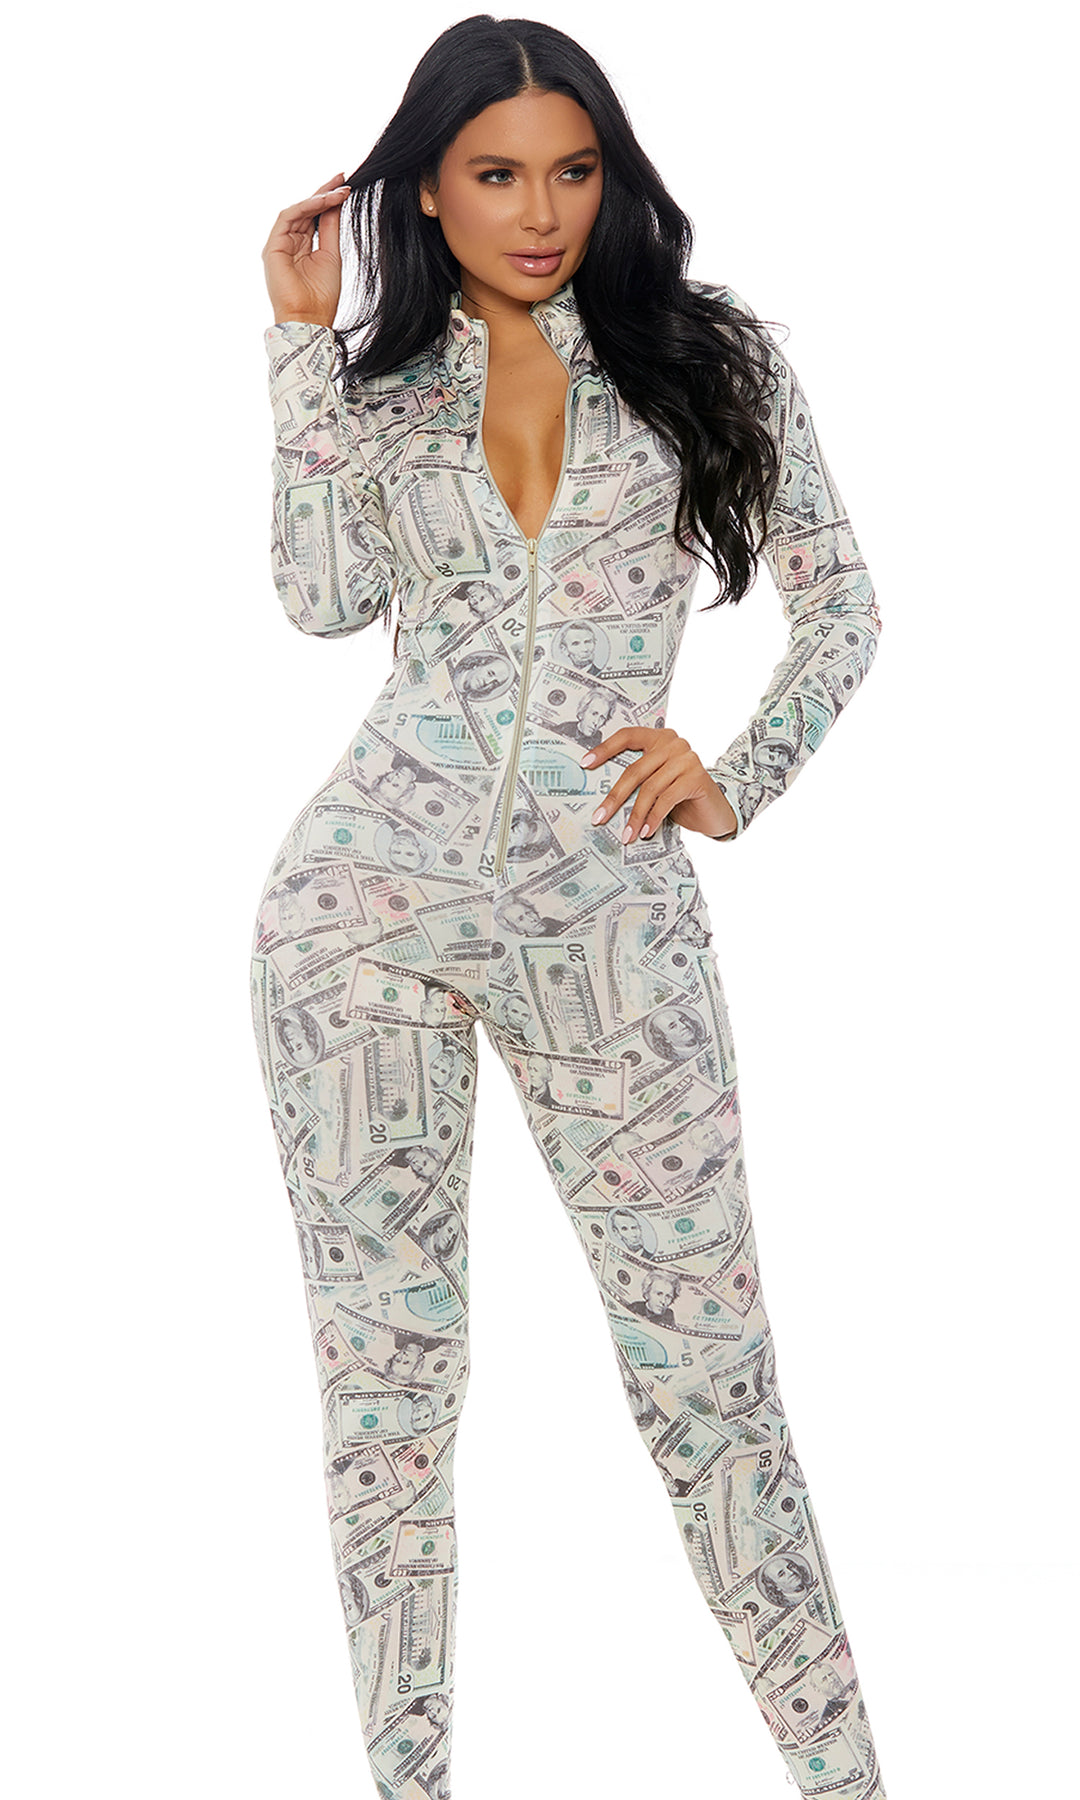 Zipfront Money Print Jumpsuit by Forplay